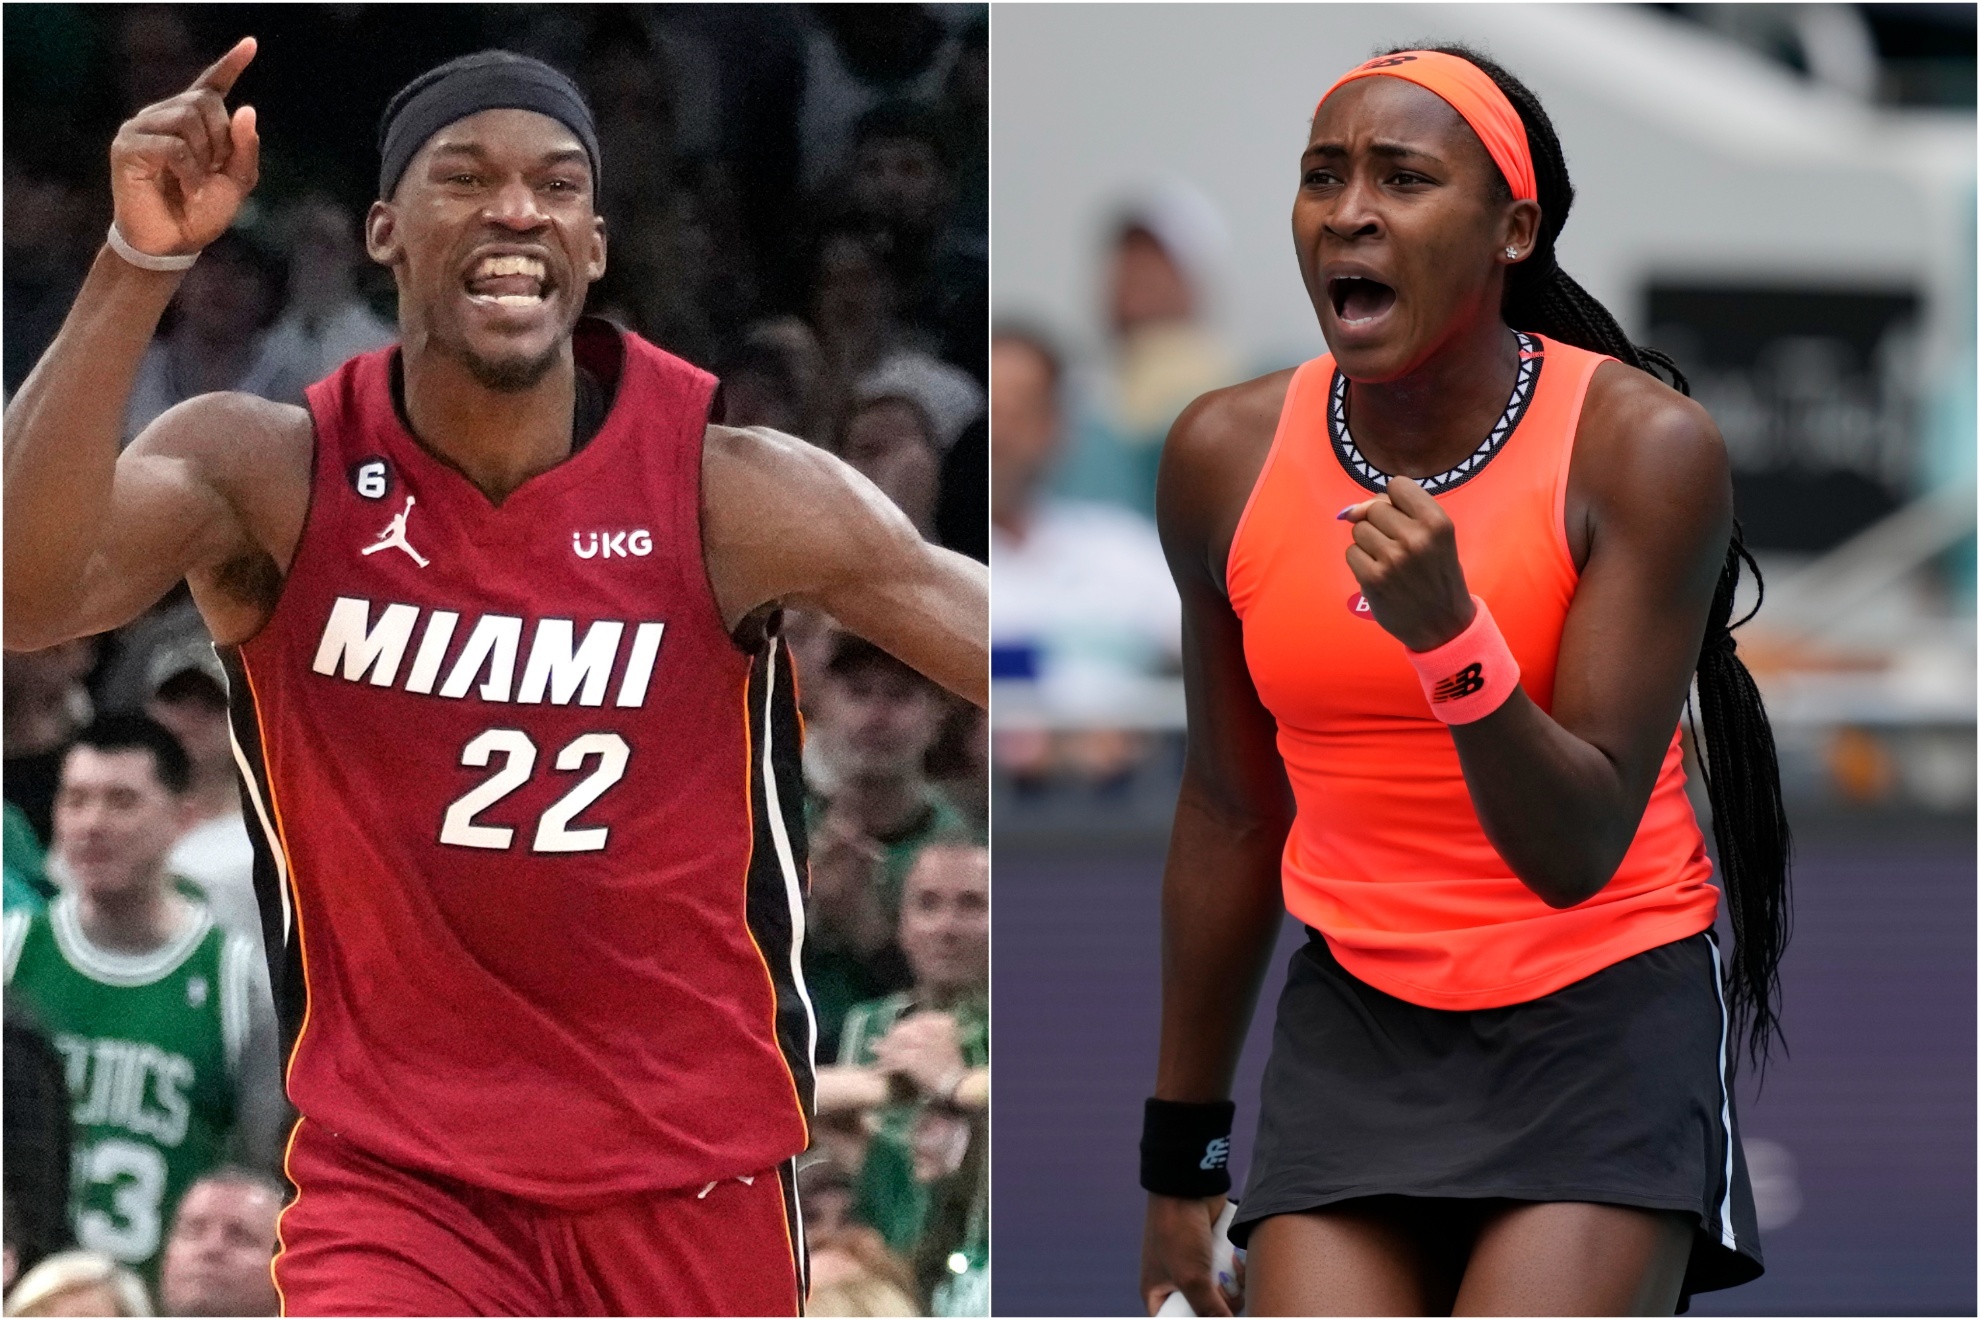 The bold promise Jimmy Butler made to Coco Gauff regarding Miami Heat and the NBA Play-offs